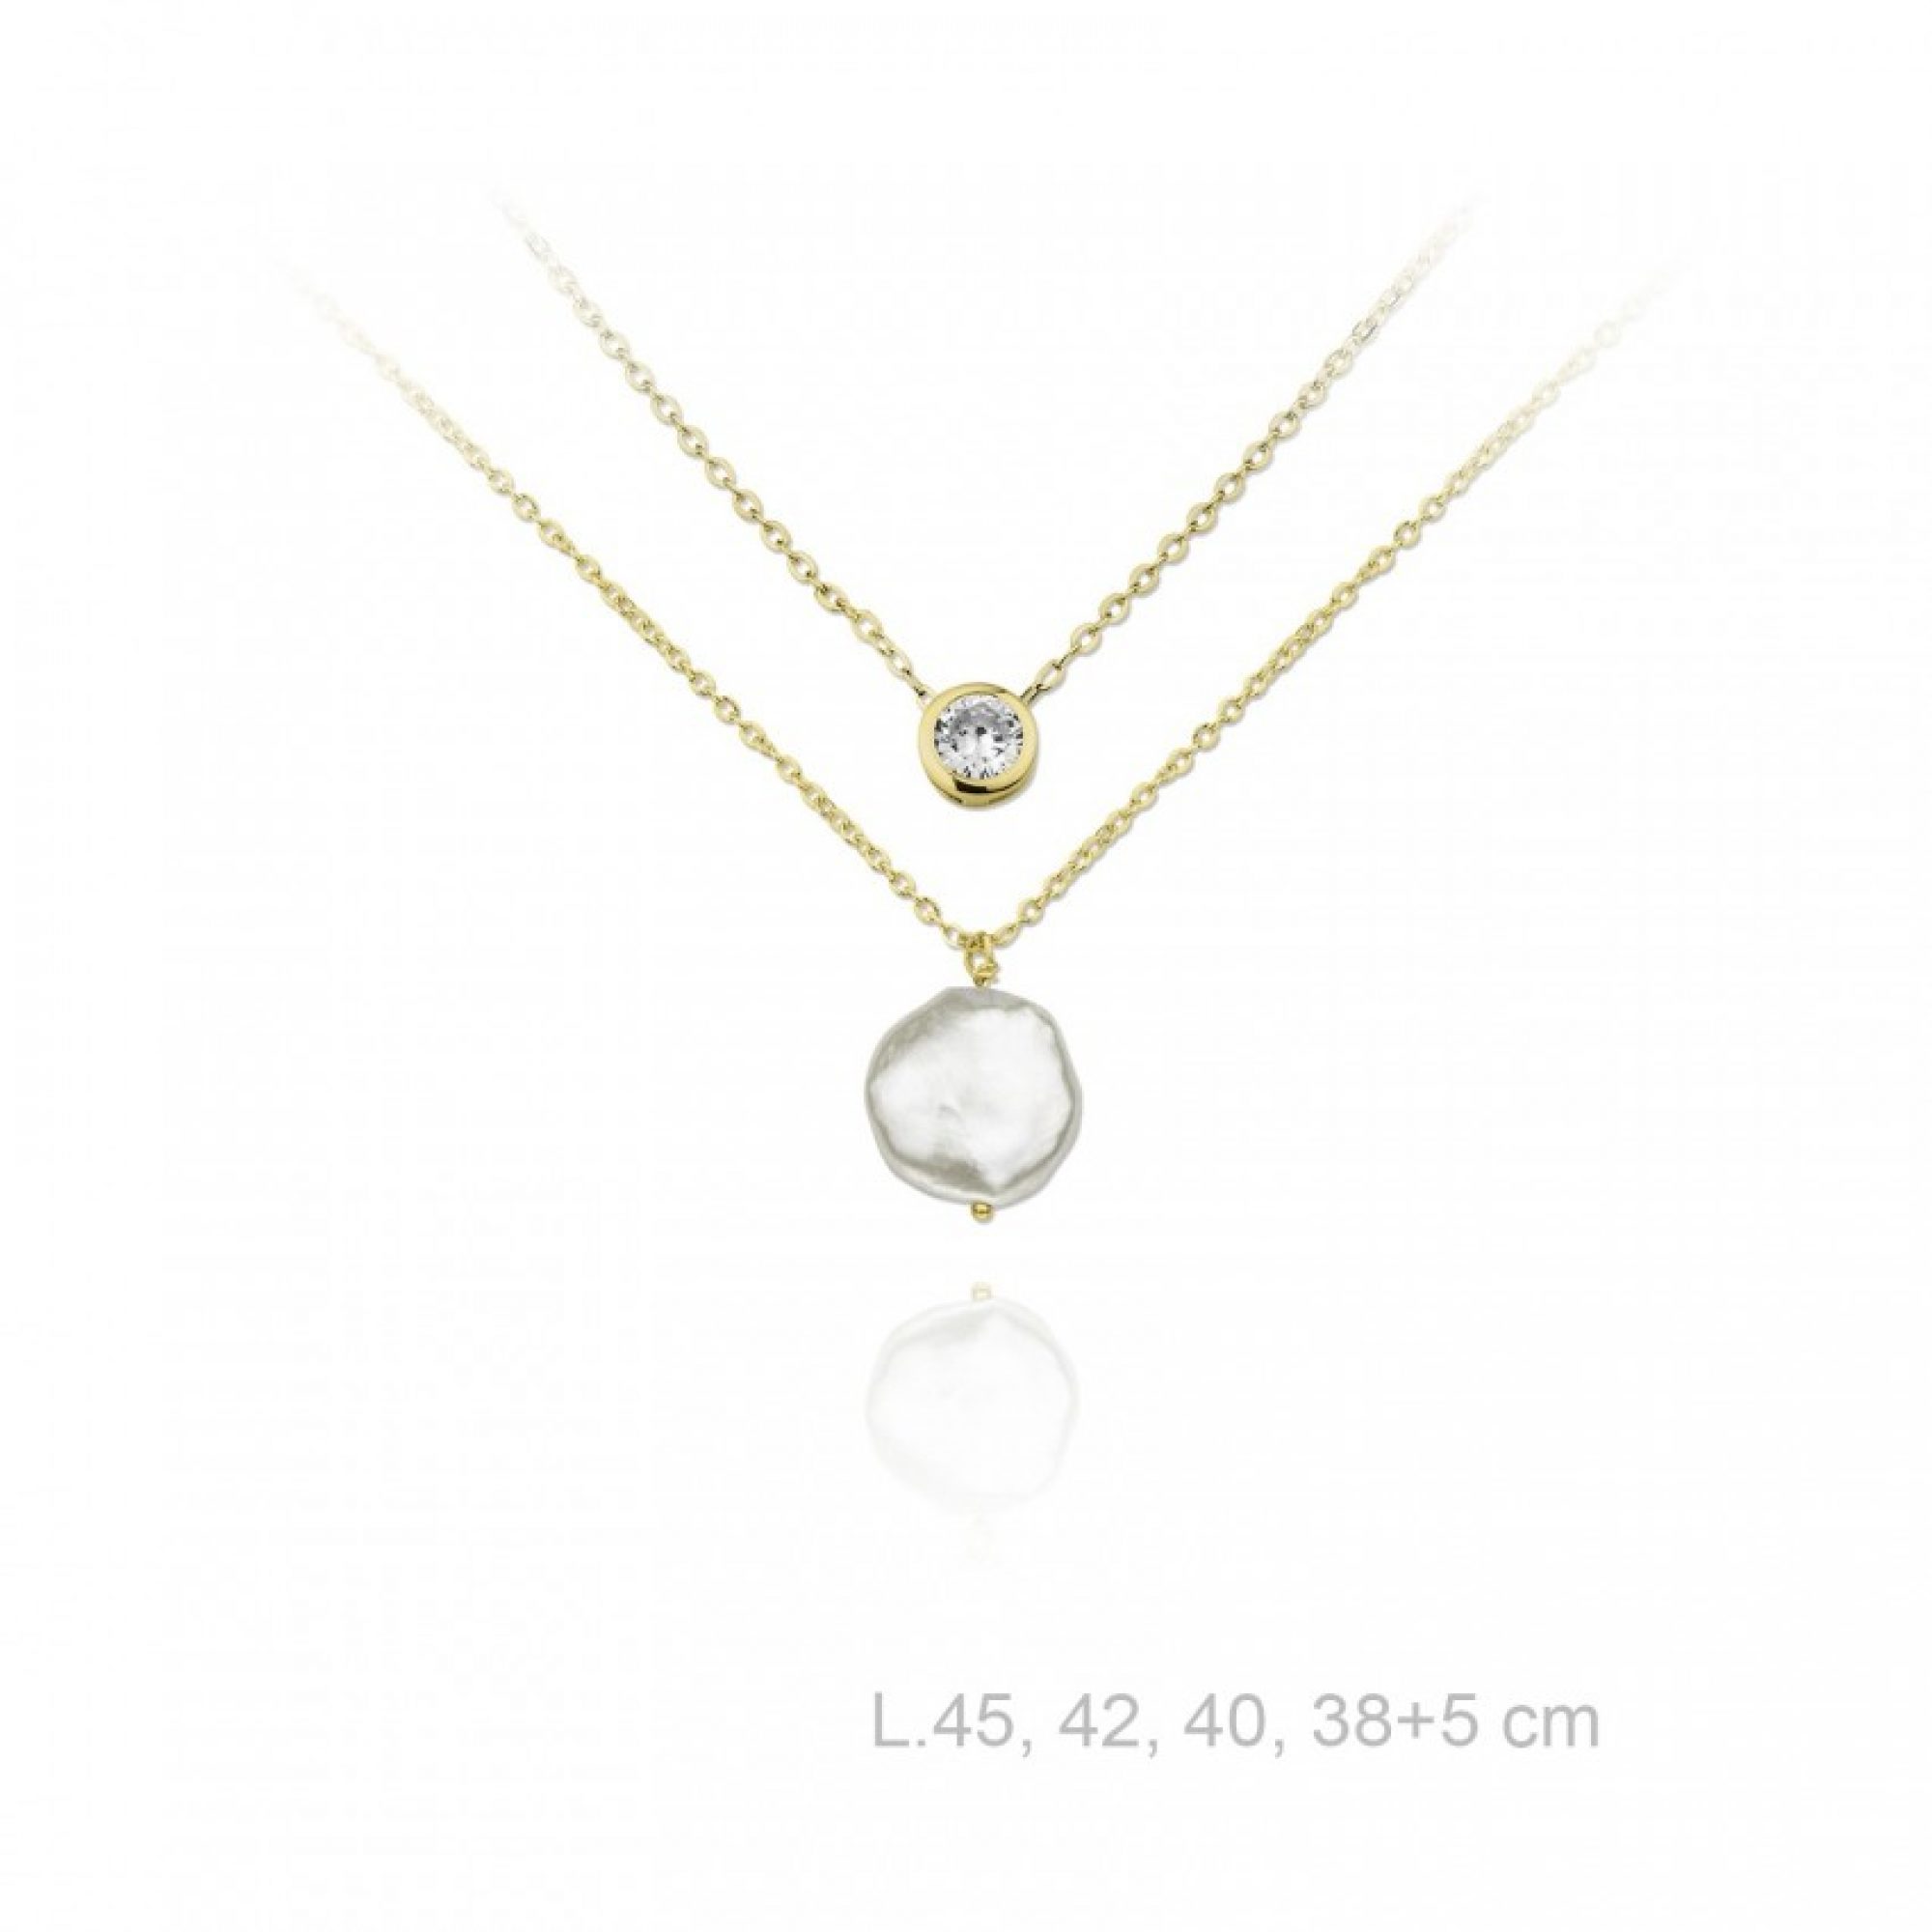 Gold plated double necklace with mother of pearl and zircon stone